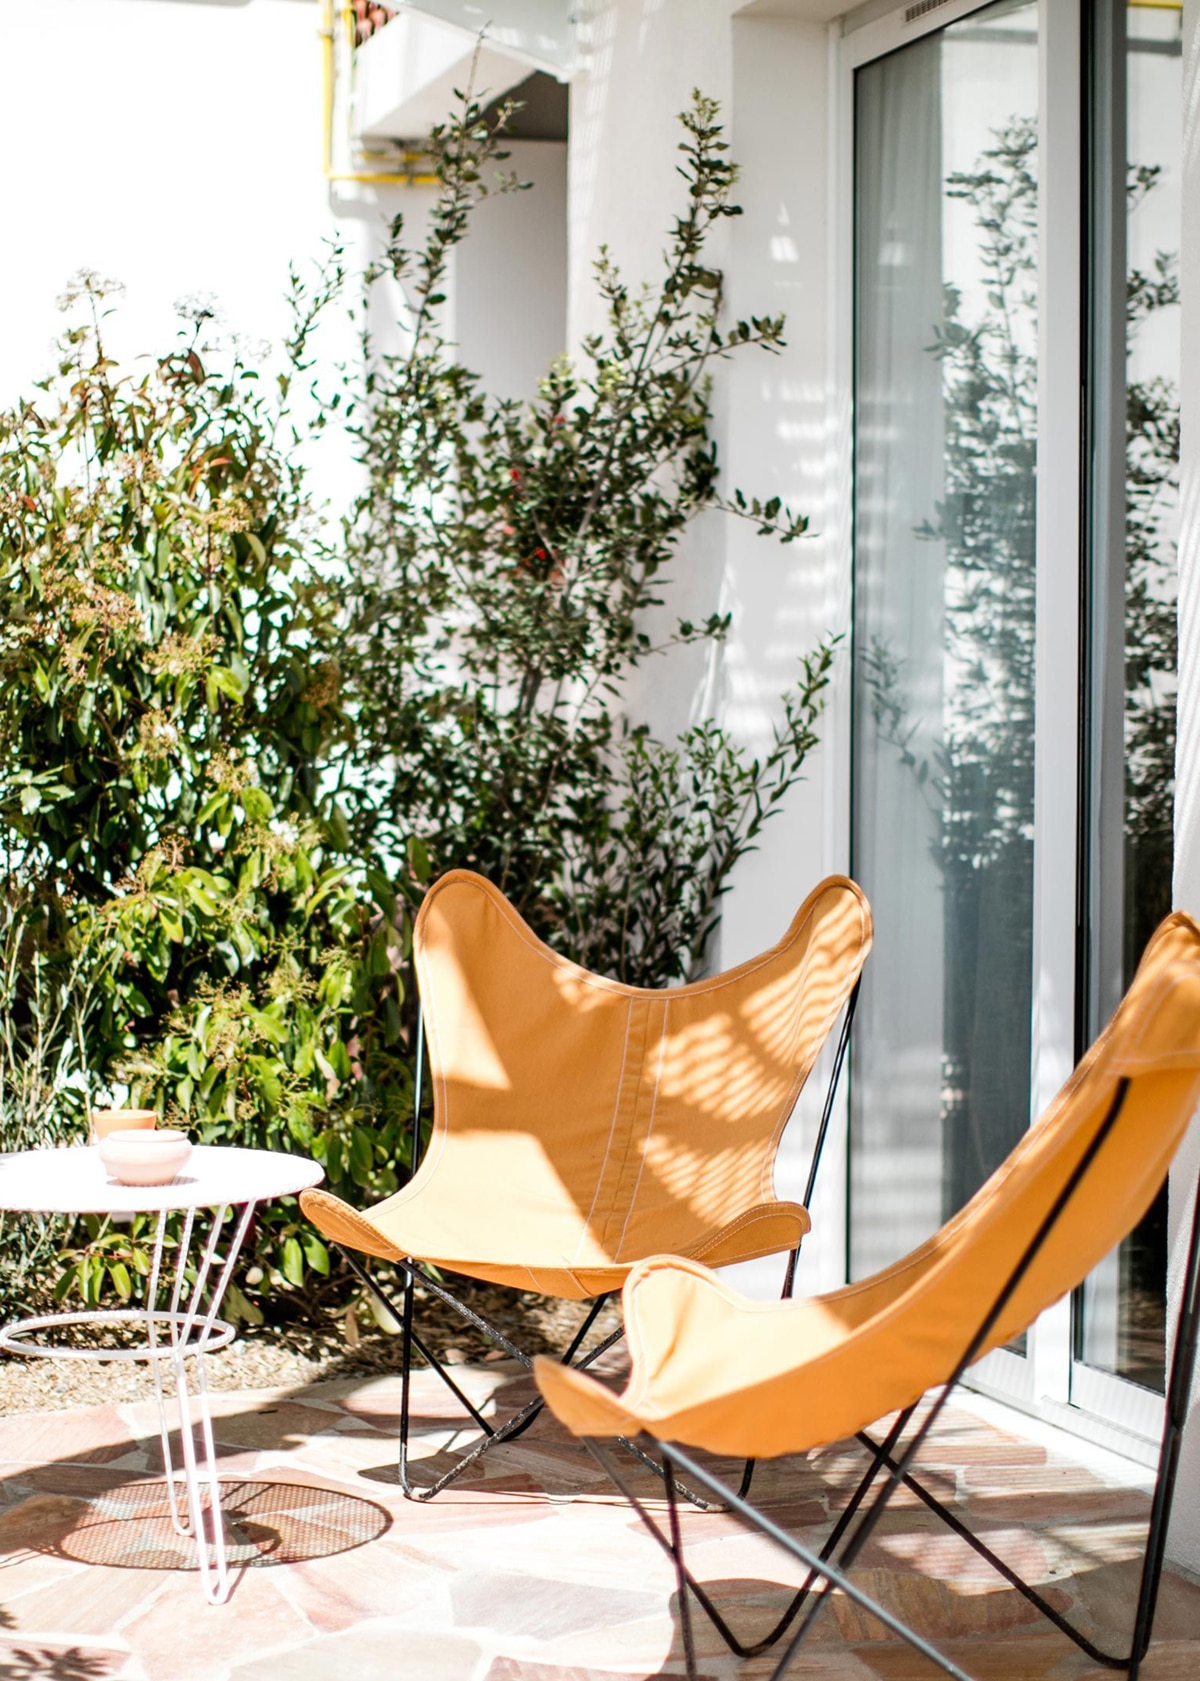 butterfly chairs on the patio | les roches rouges hotel in france